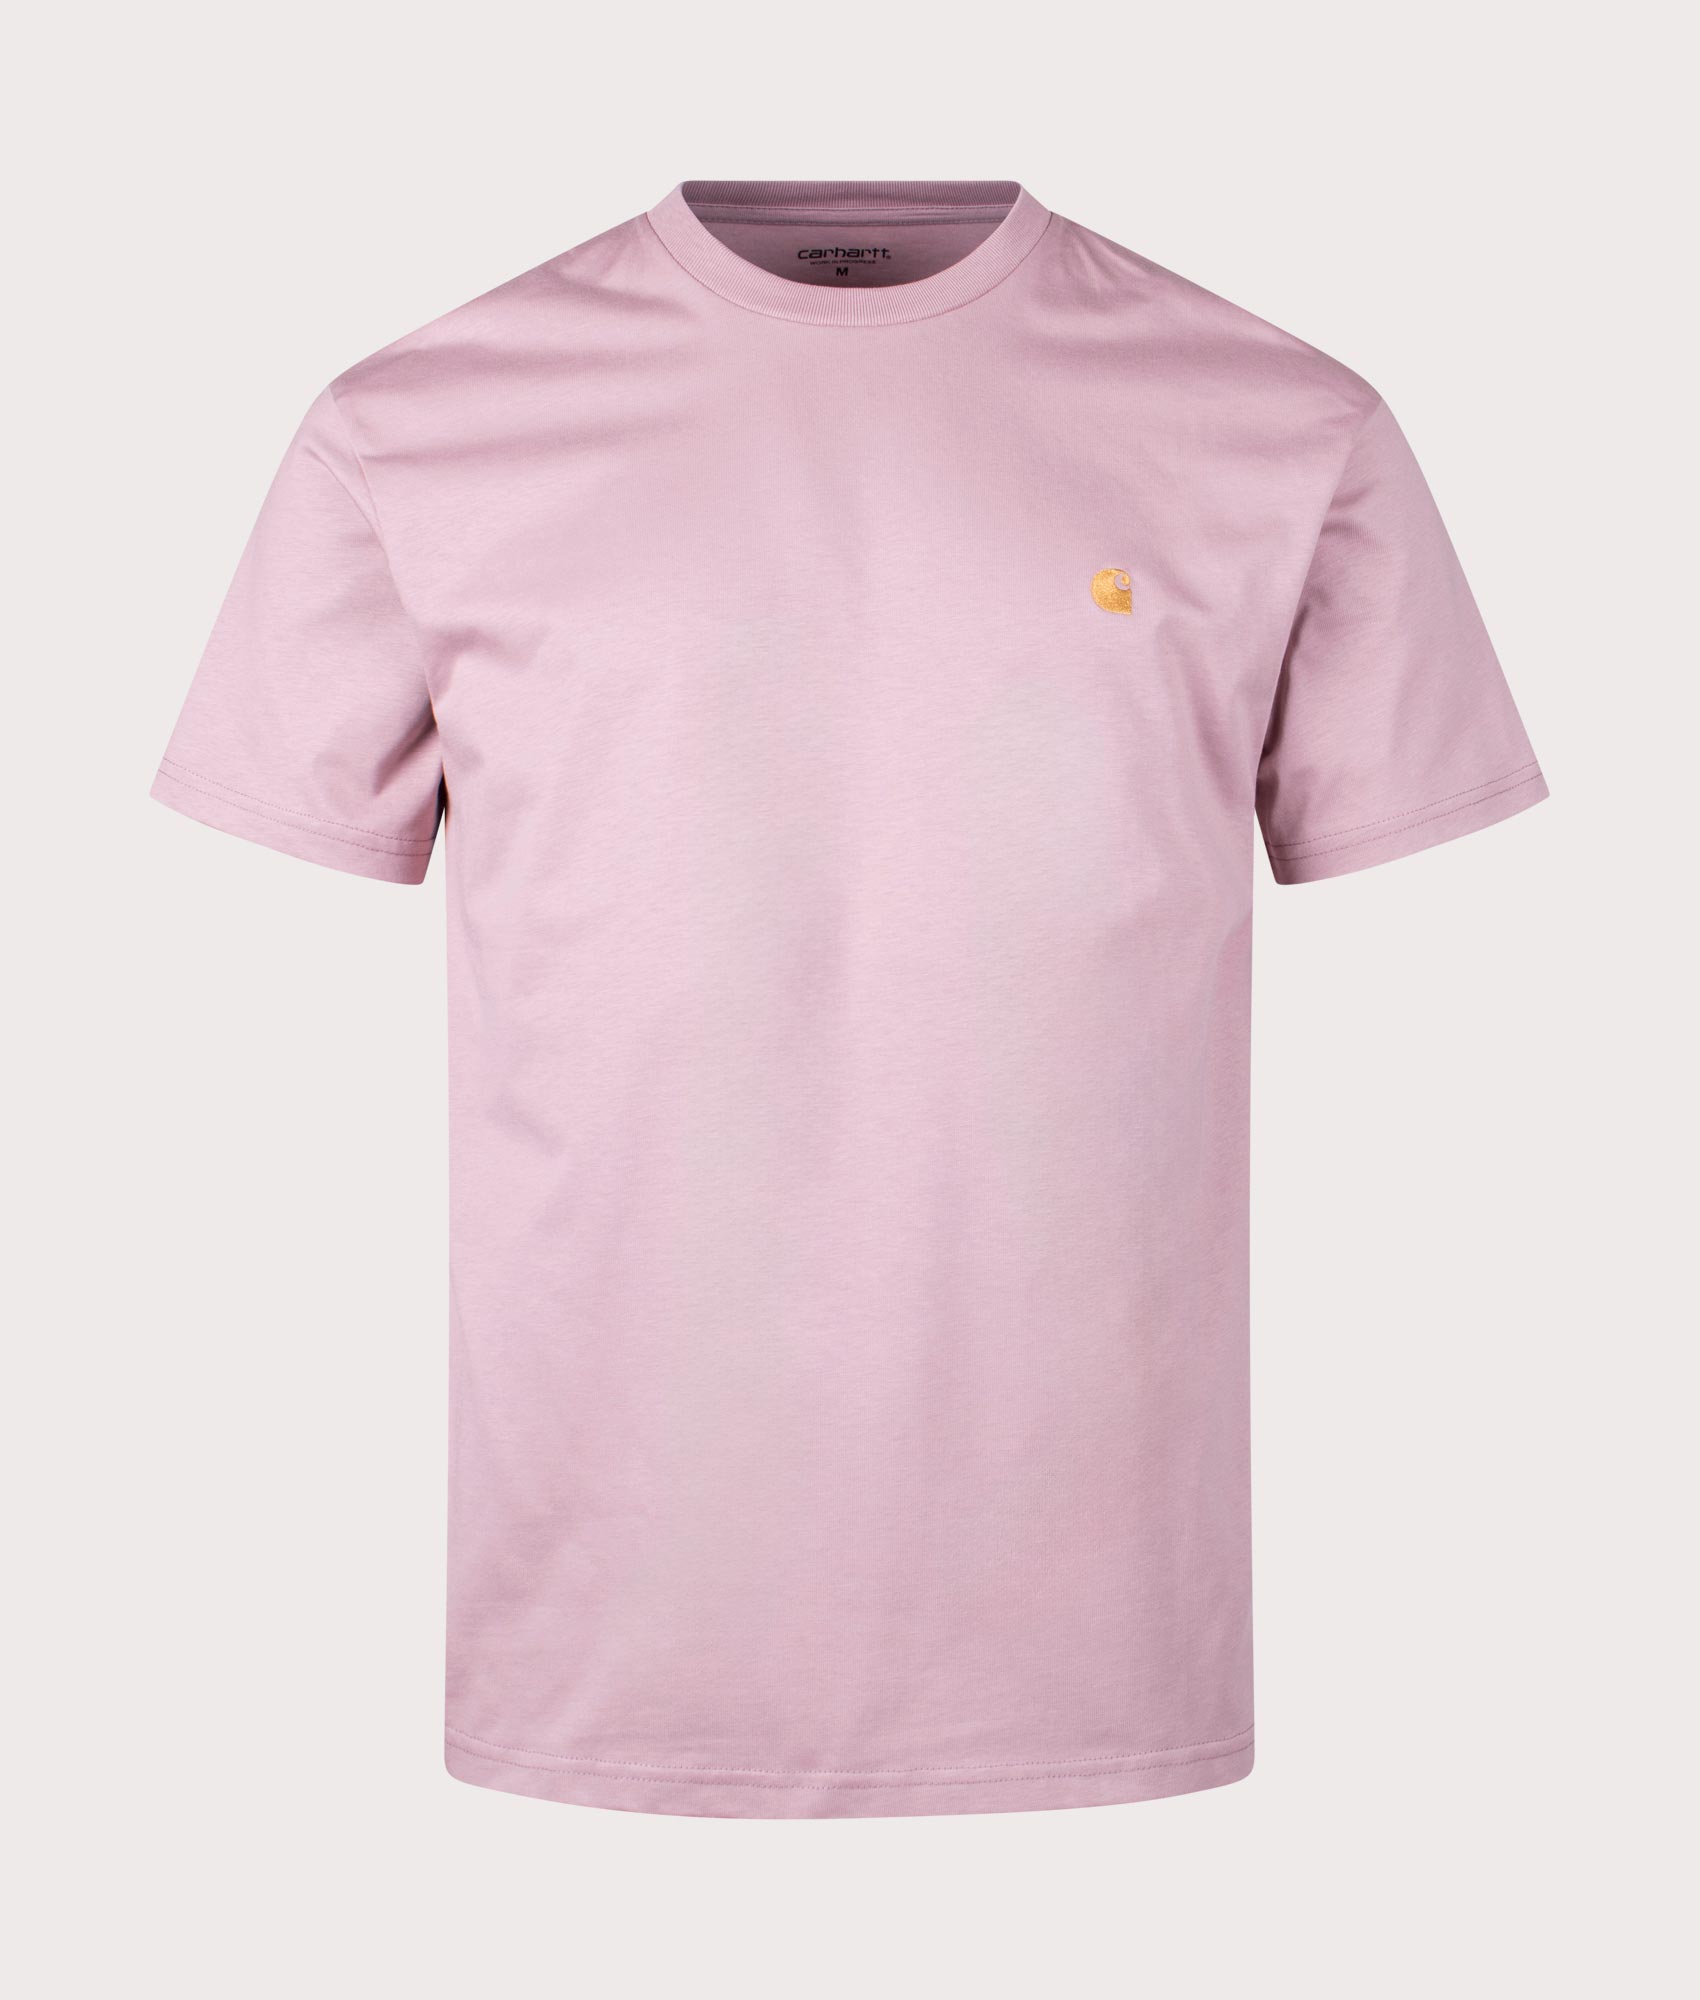 Carhartt WIP Mens Relaxed Fit Chase T-Shirt - Colour: 24CXX Glassy Pink/Gold - Size: XL